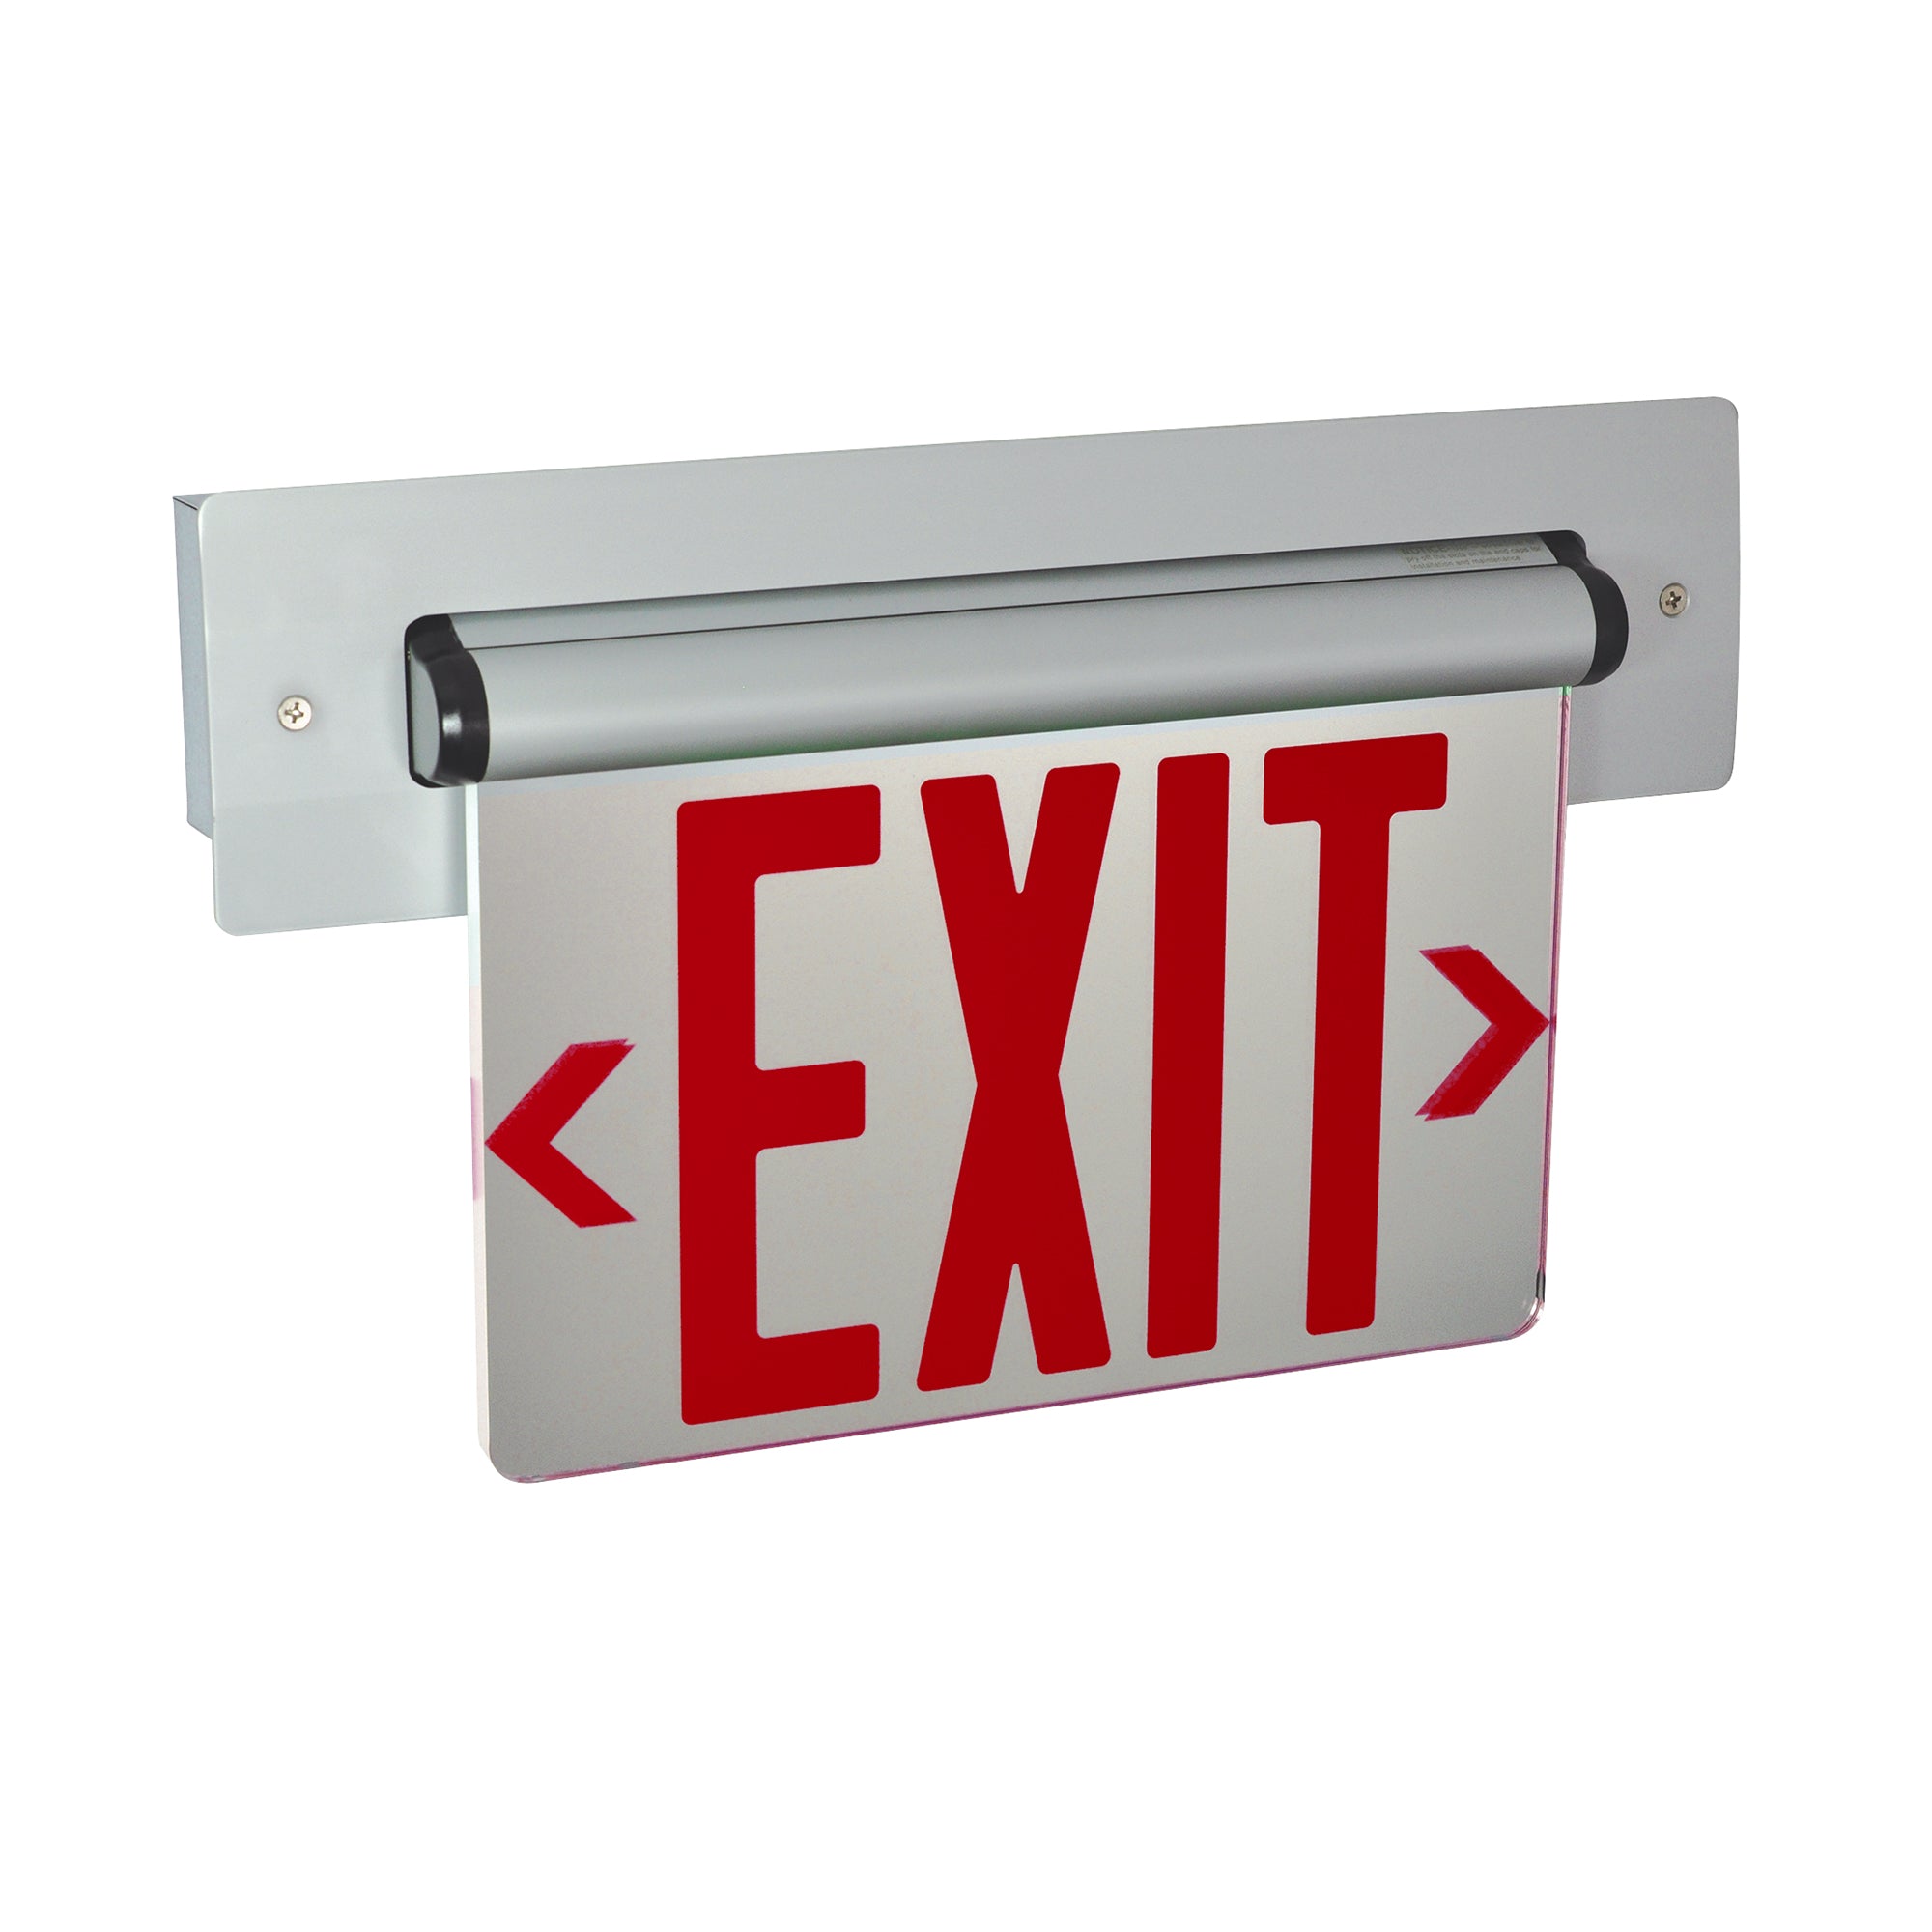 Nora Lighting NX-815-LEDR2MW - Exit / Emergency - Recessed Adjustable LED Edge-Lit Exit Sign, Battery Backup, 6 Inch Red Letters, Double Face / Mirrored Acrylic, White Housing